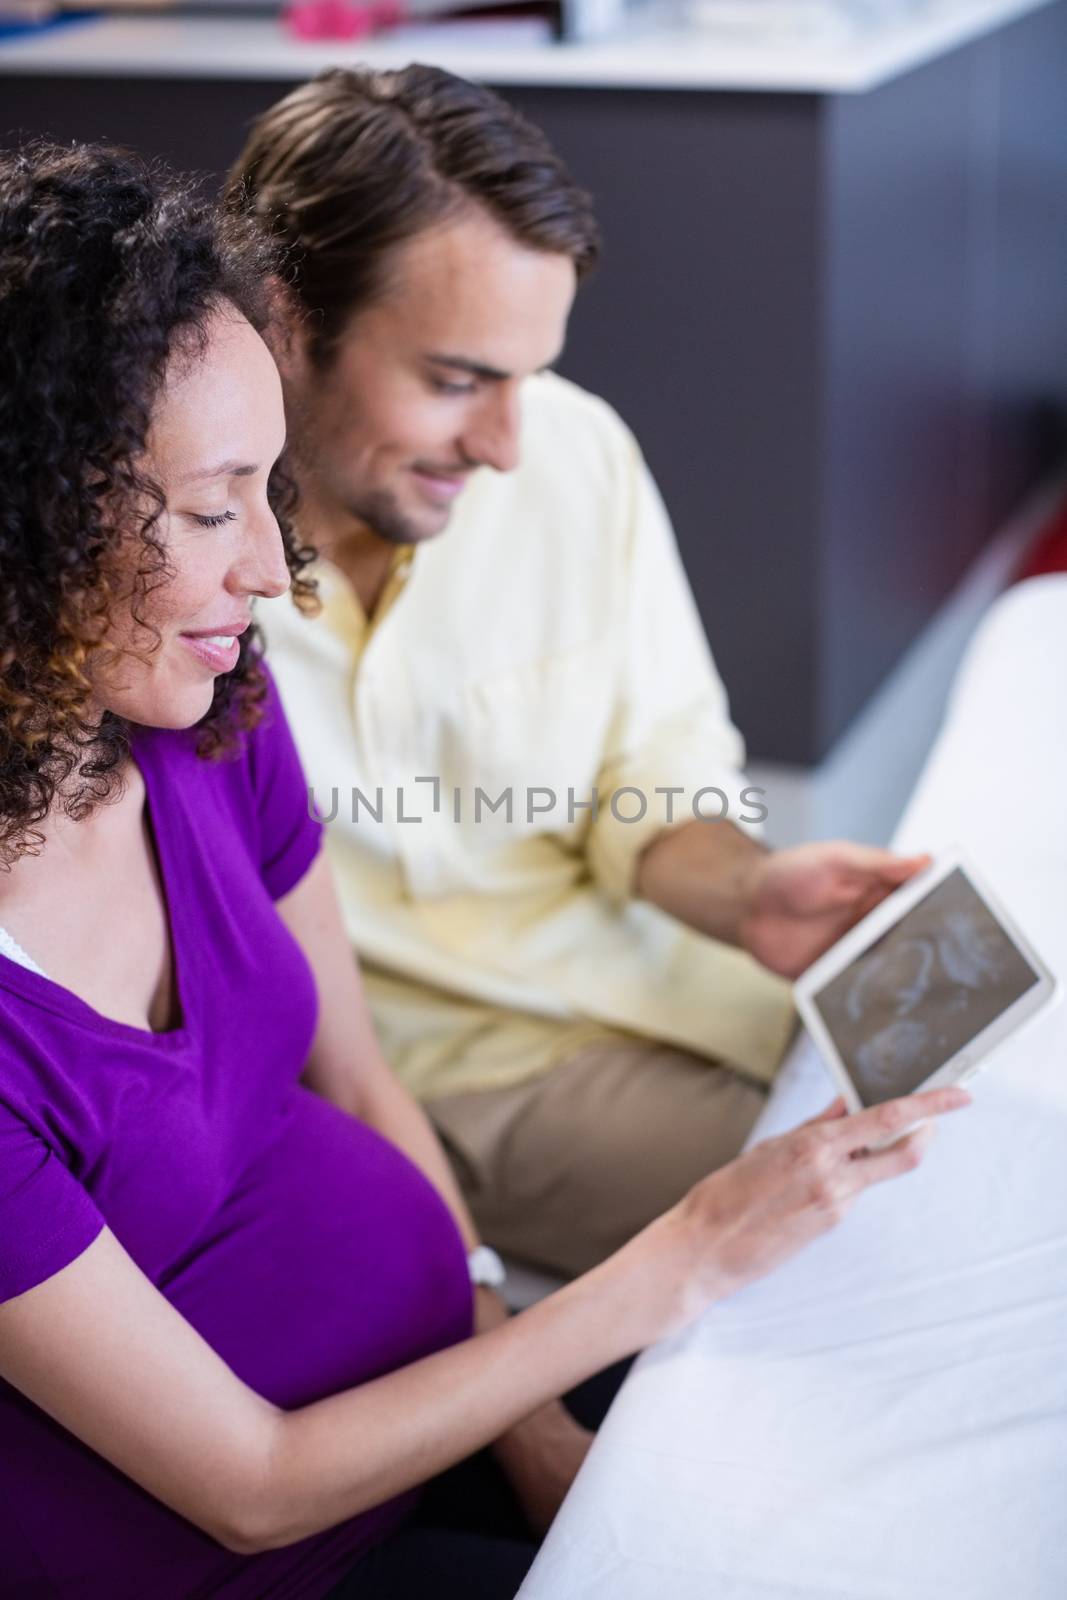 Couple looking at babies ultrasound scan on digital tablet in hospital